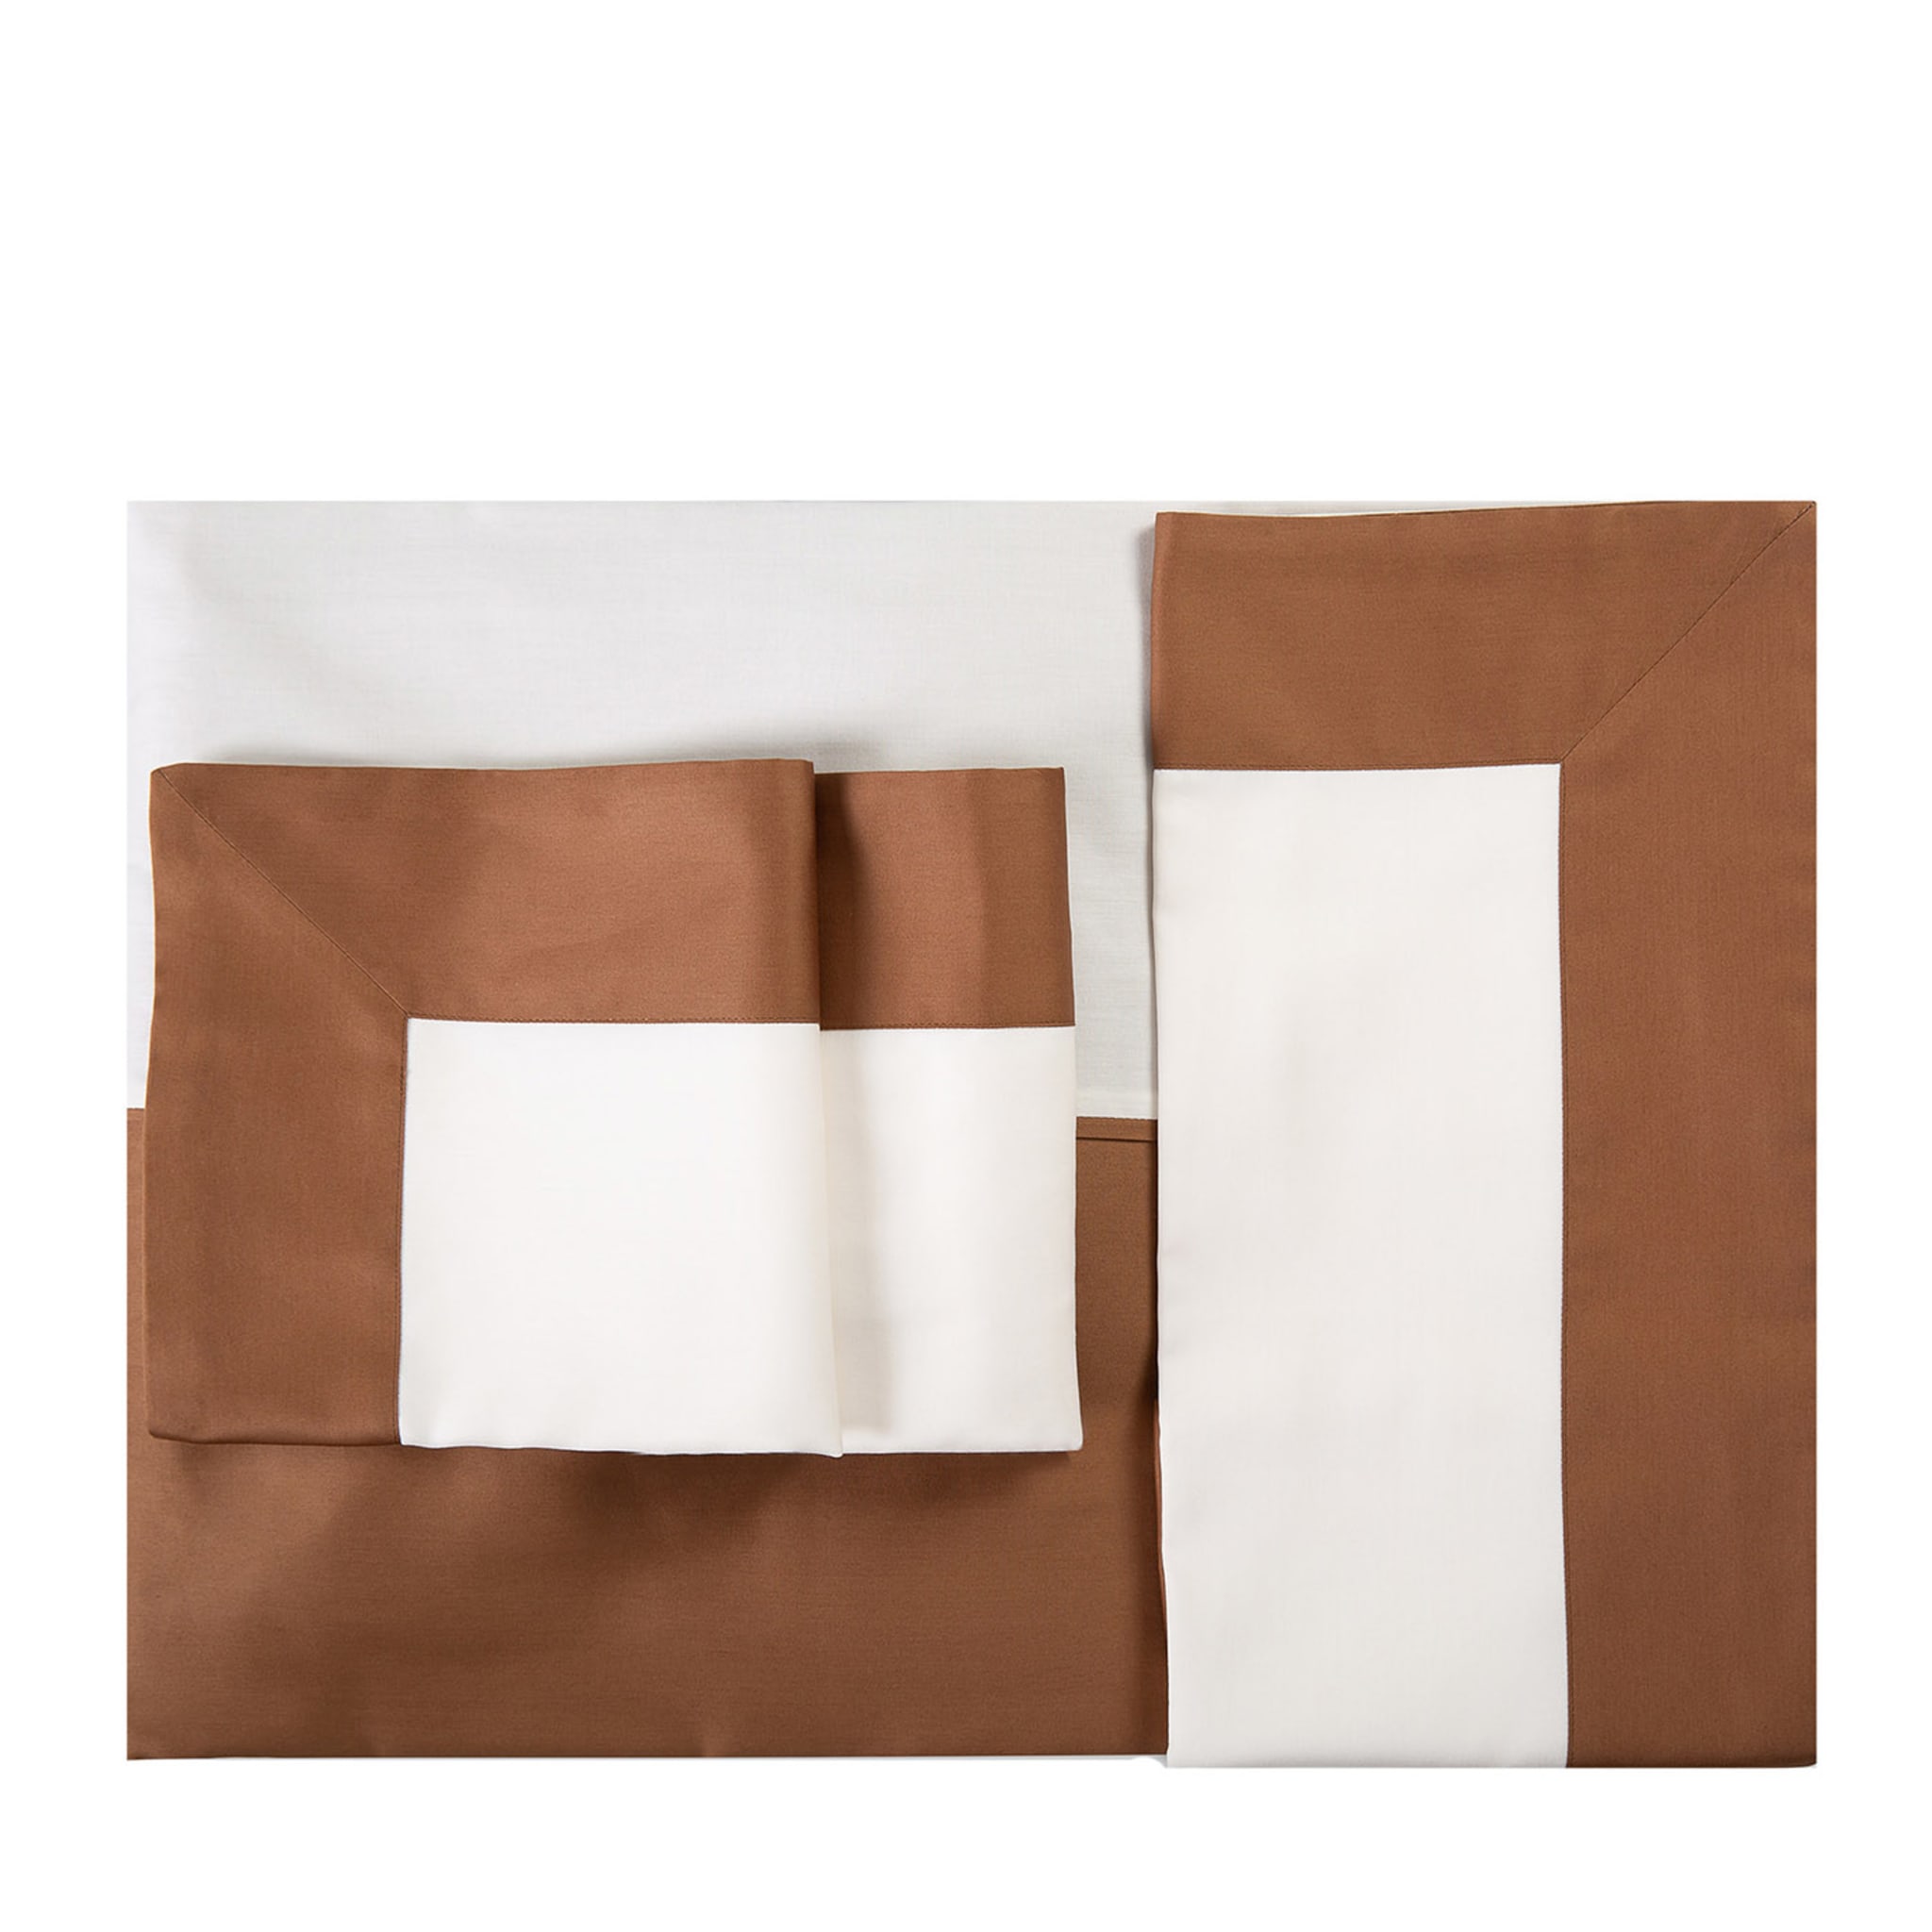 Apollo Set of Ivory & Chestnut Duvet Cover and 2 Pillowcases  - Main view